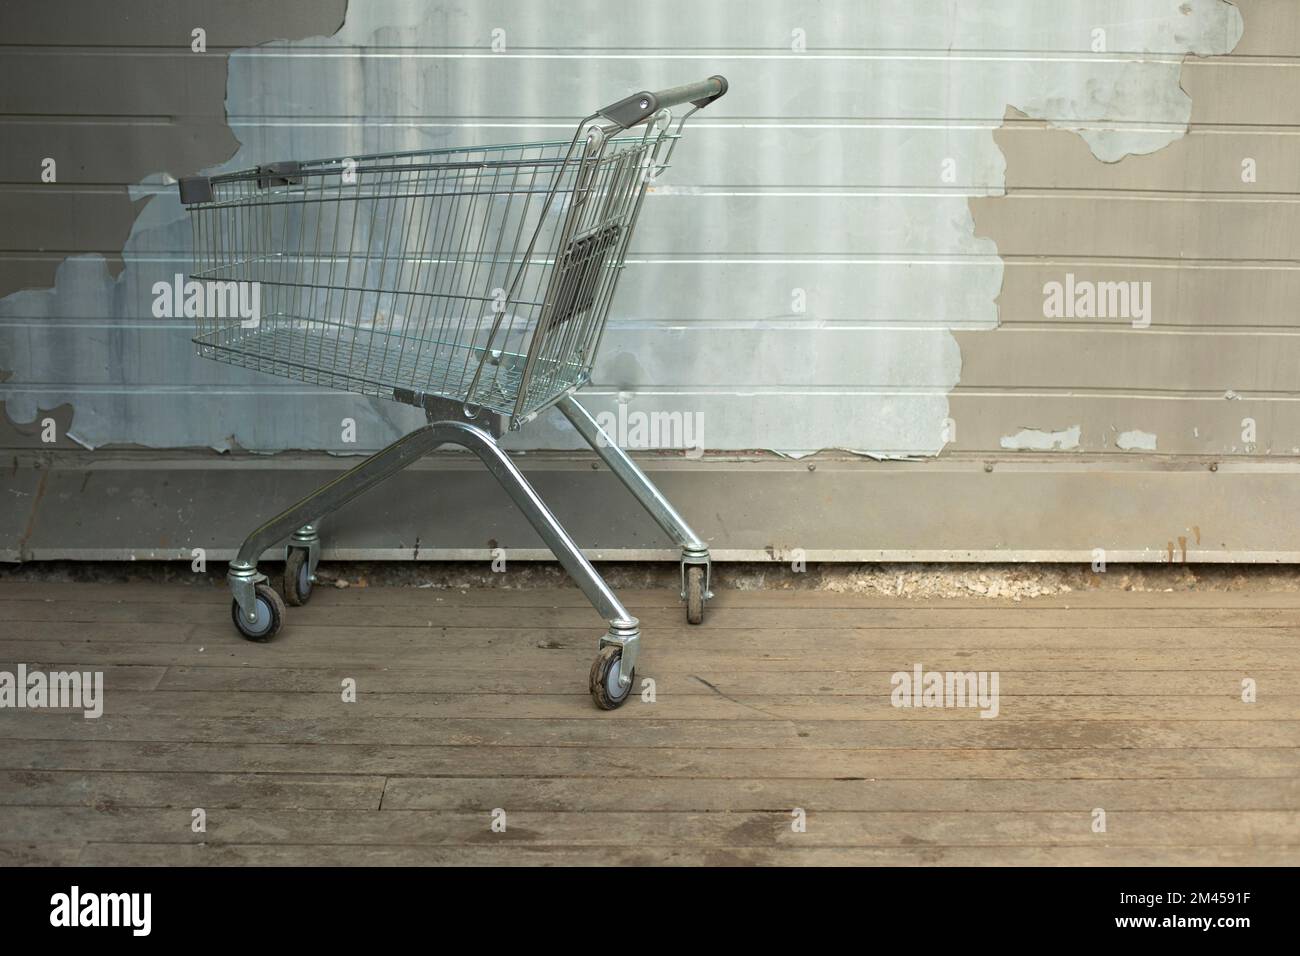 Cart for groceries from supermarket. Steel basket for goods on street. Cart on wheels. Stock Photo